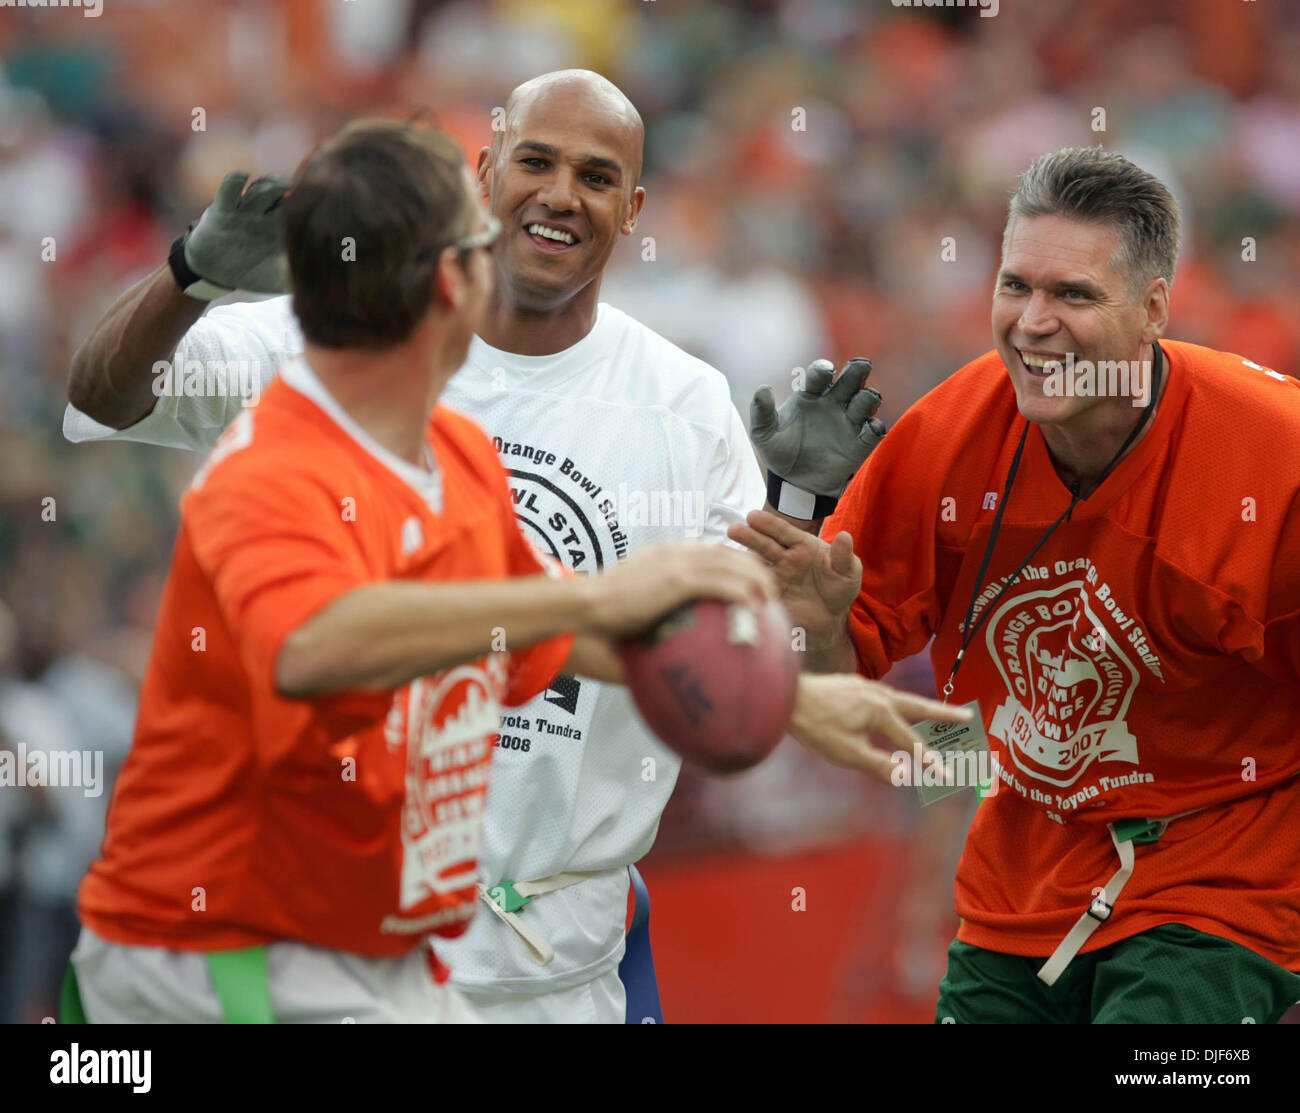 Jan 26, 2008 - Miami, Florida, USA - Former Miami Dolphin and U of Miami Hurricanes football stars play a 'Farewell to the Orange Bowl' flag football game in the Orange Bowl. PICTURED: JASON TAYLOR, center, gets past former Hurricane BILL HAWKINS, right, to pressure QB STEVE WALSH. (Credit Image: © Allen Eyestone/Palm Beach Post/ZUMA Pess) RESTRICTIONS: * USA Tabloids Rights OUT * Stock Photo